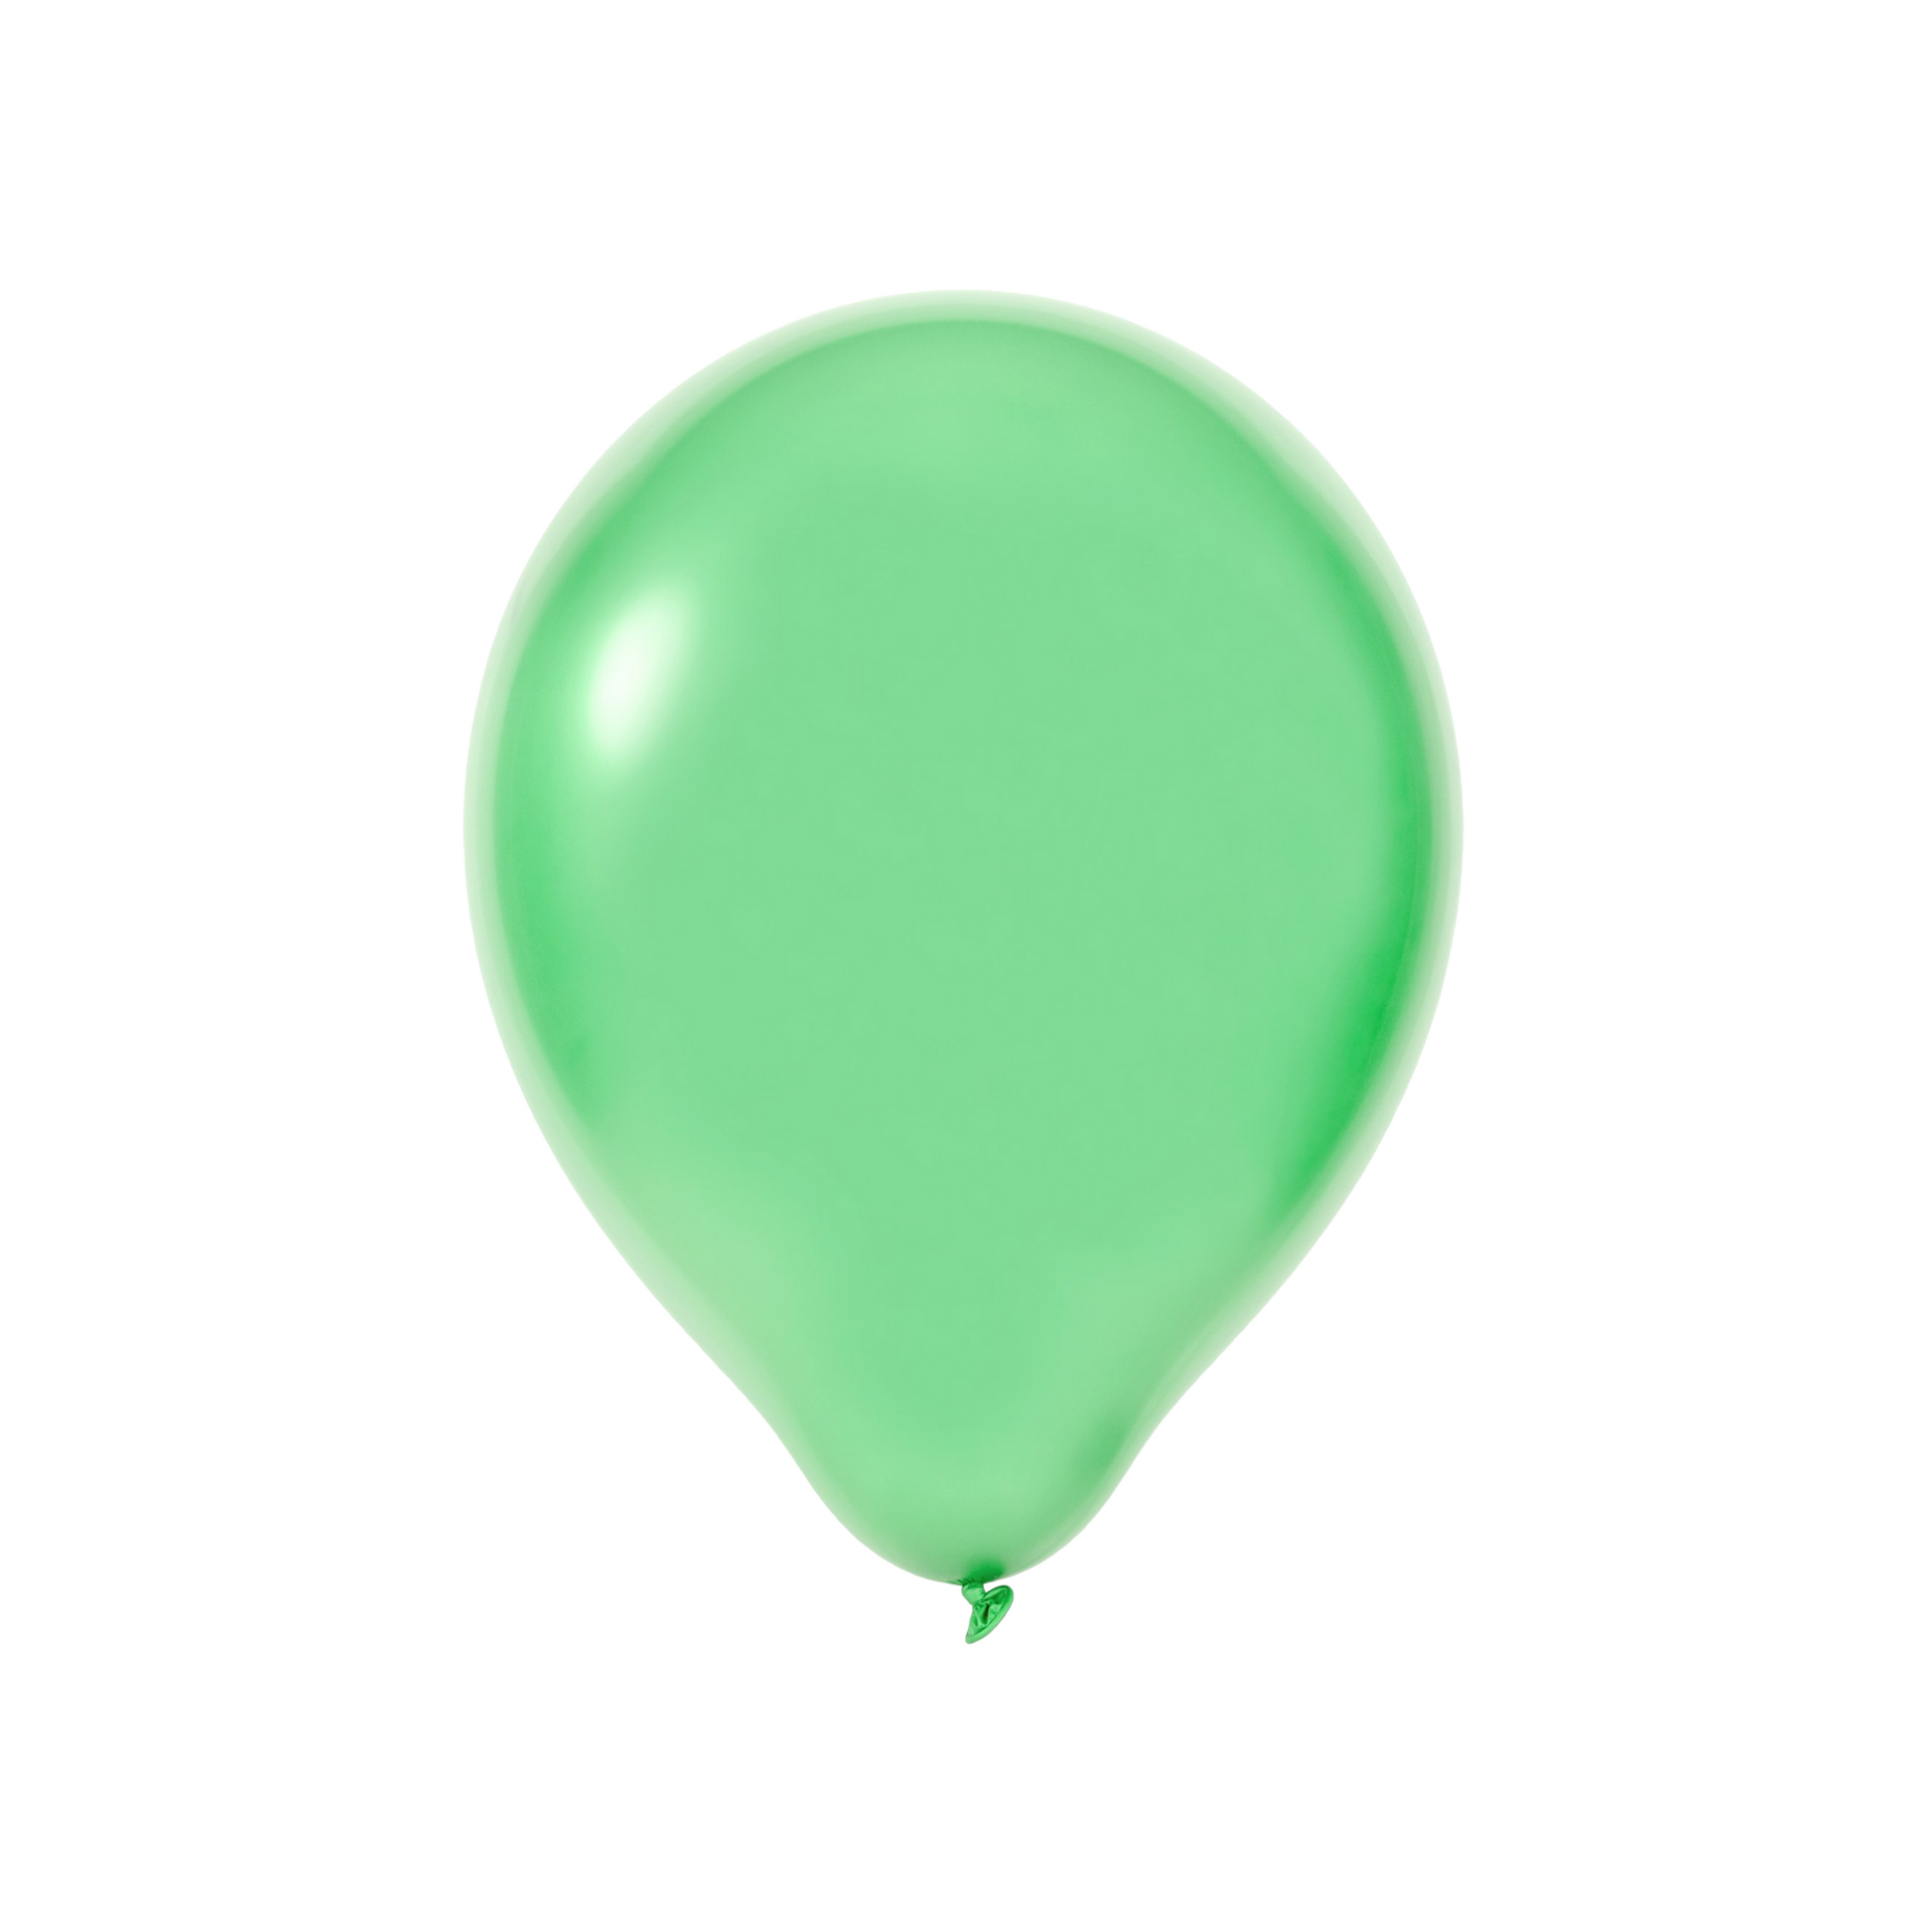 Huge Apple Green 18 Large Round Latex Balloons